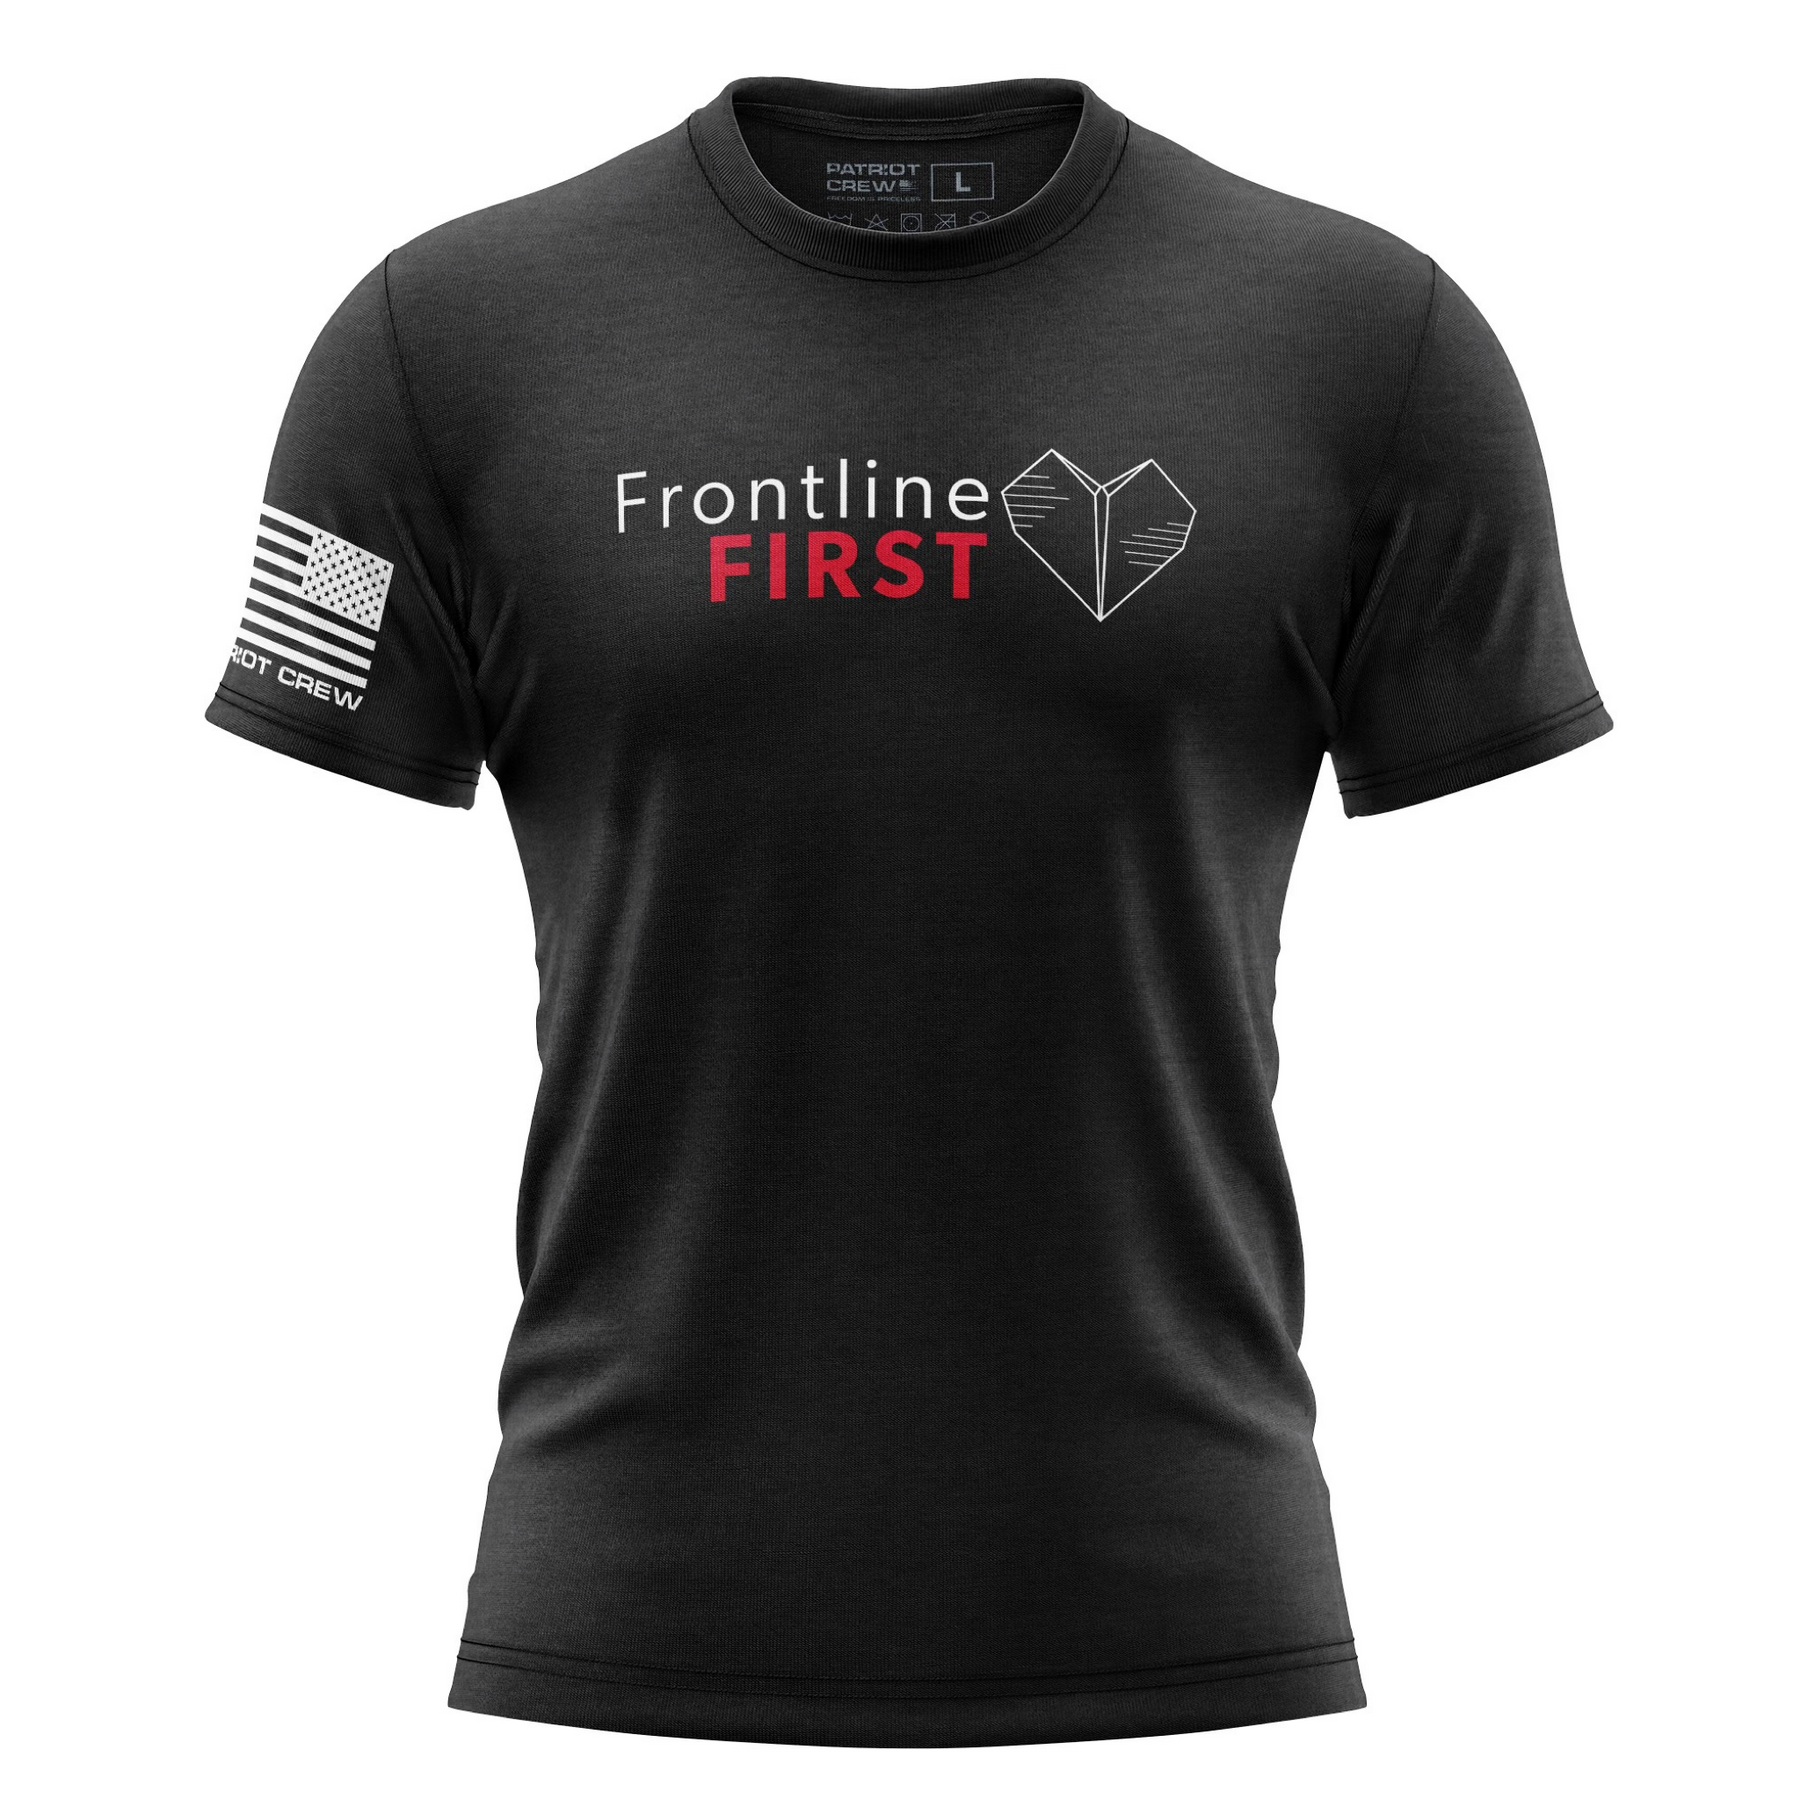 Frontline First T-Shirt